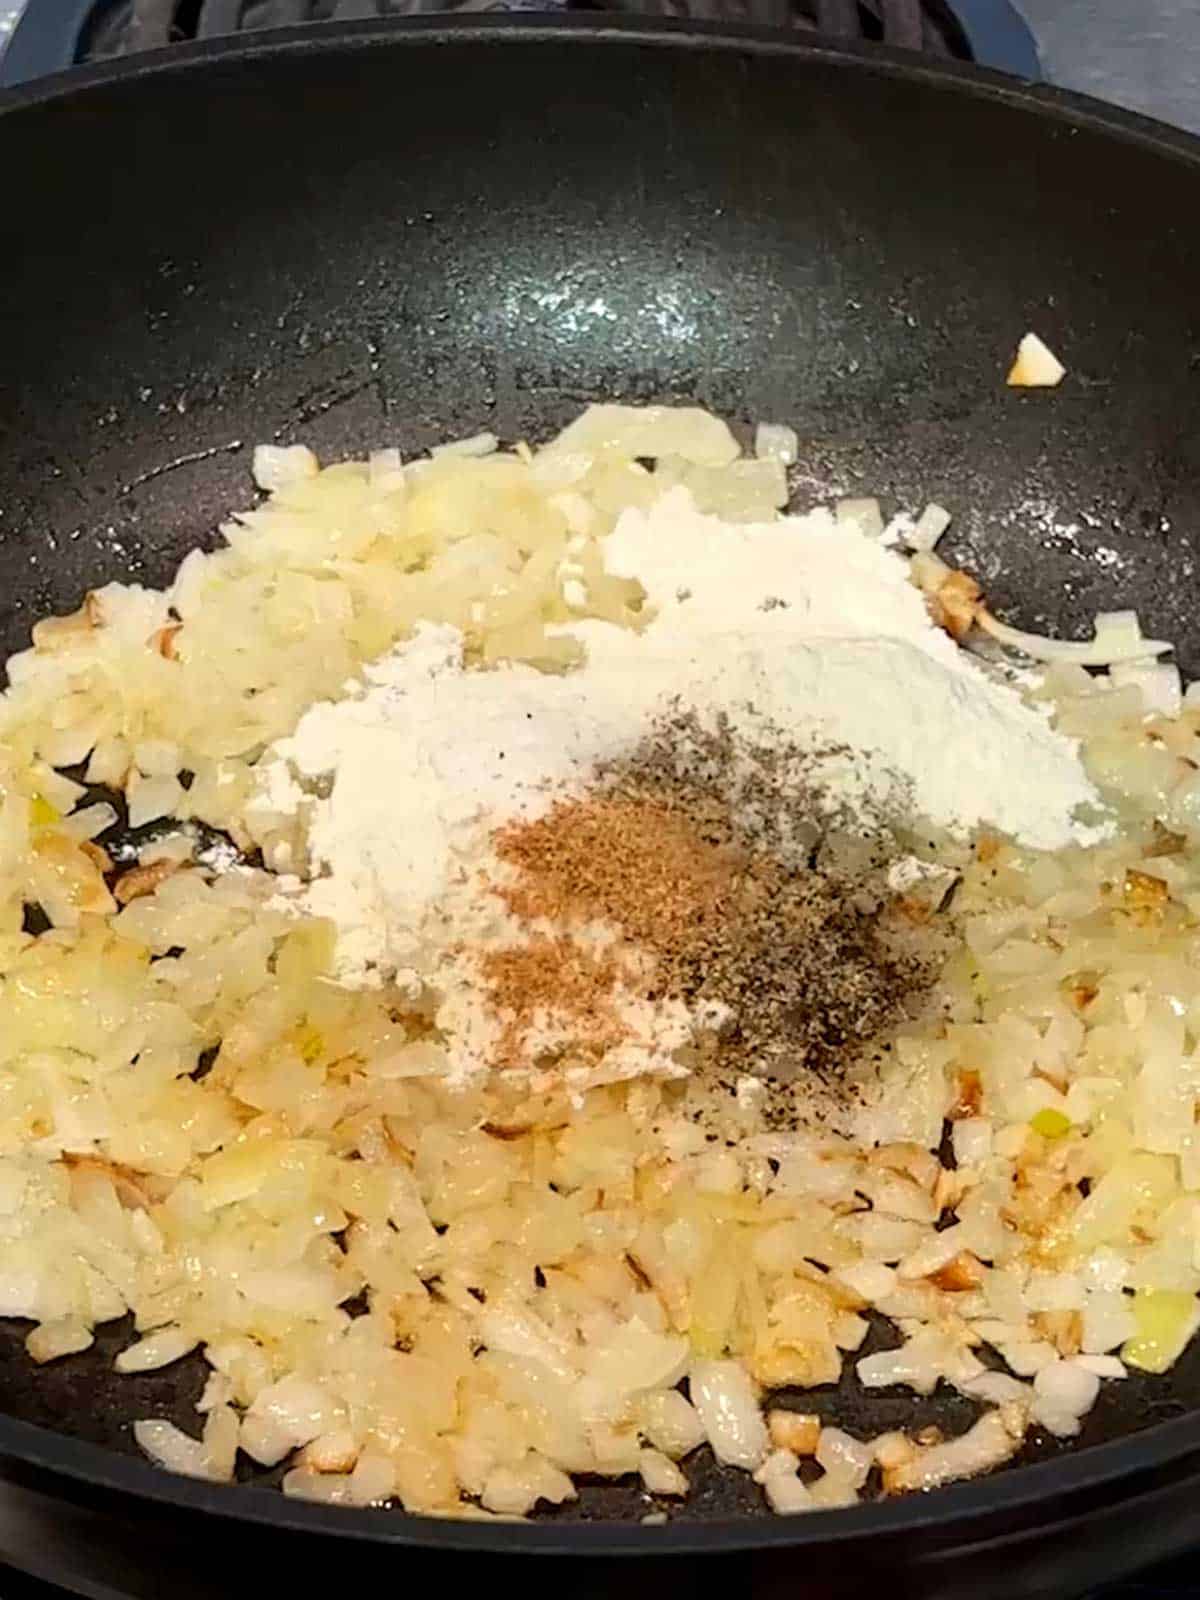 Flour, salt, pepper, and nutmeg added to the onions in the skillet.